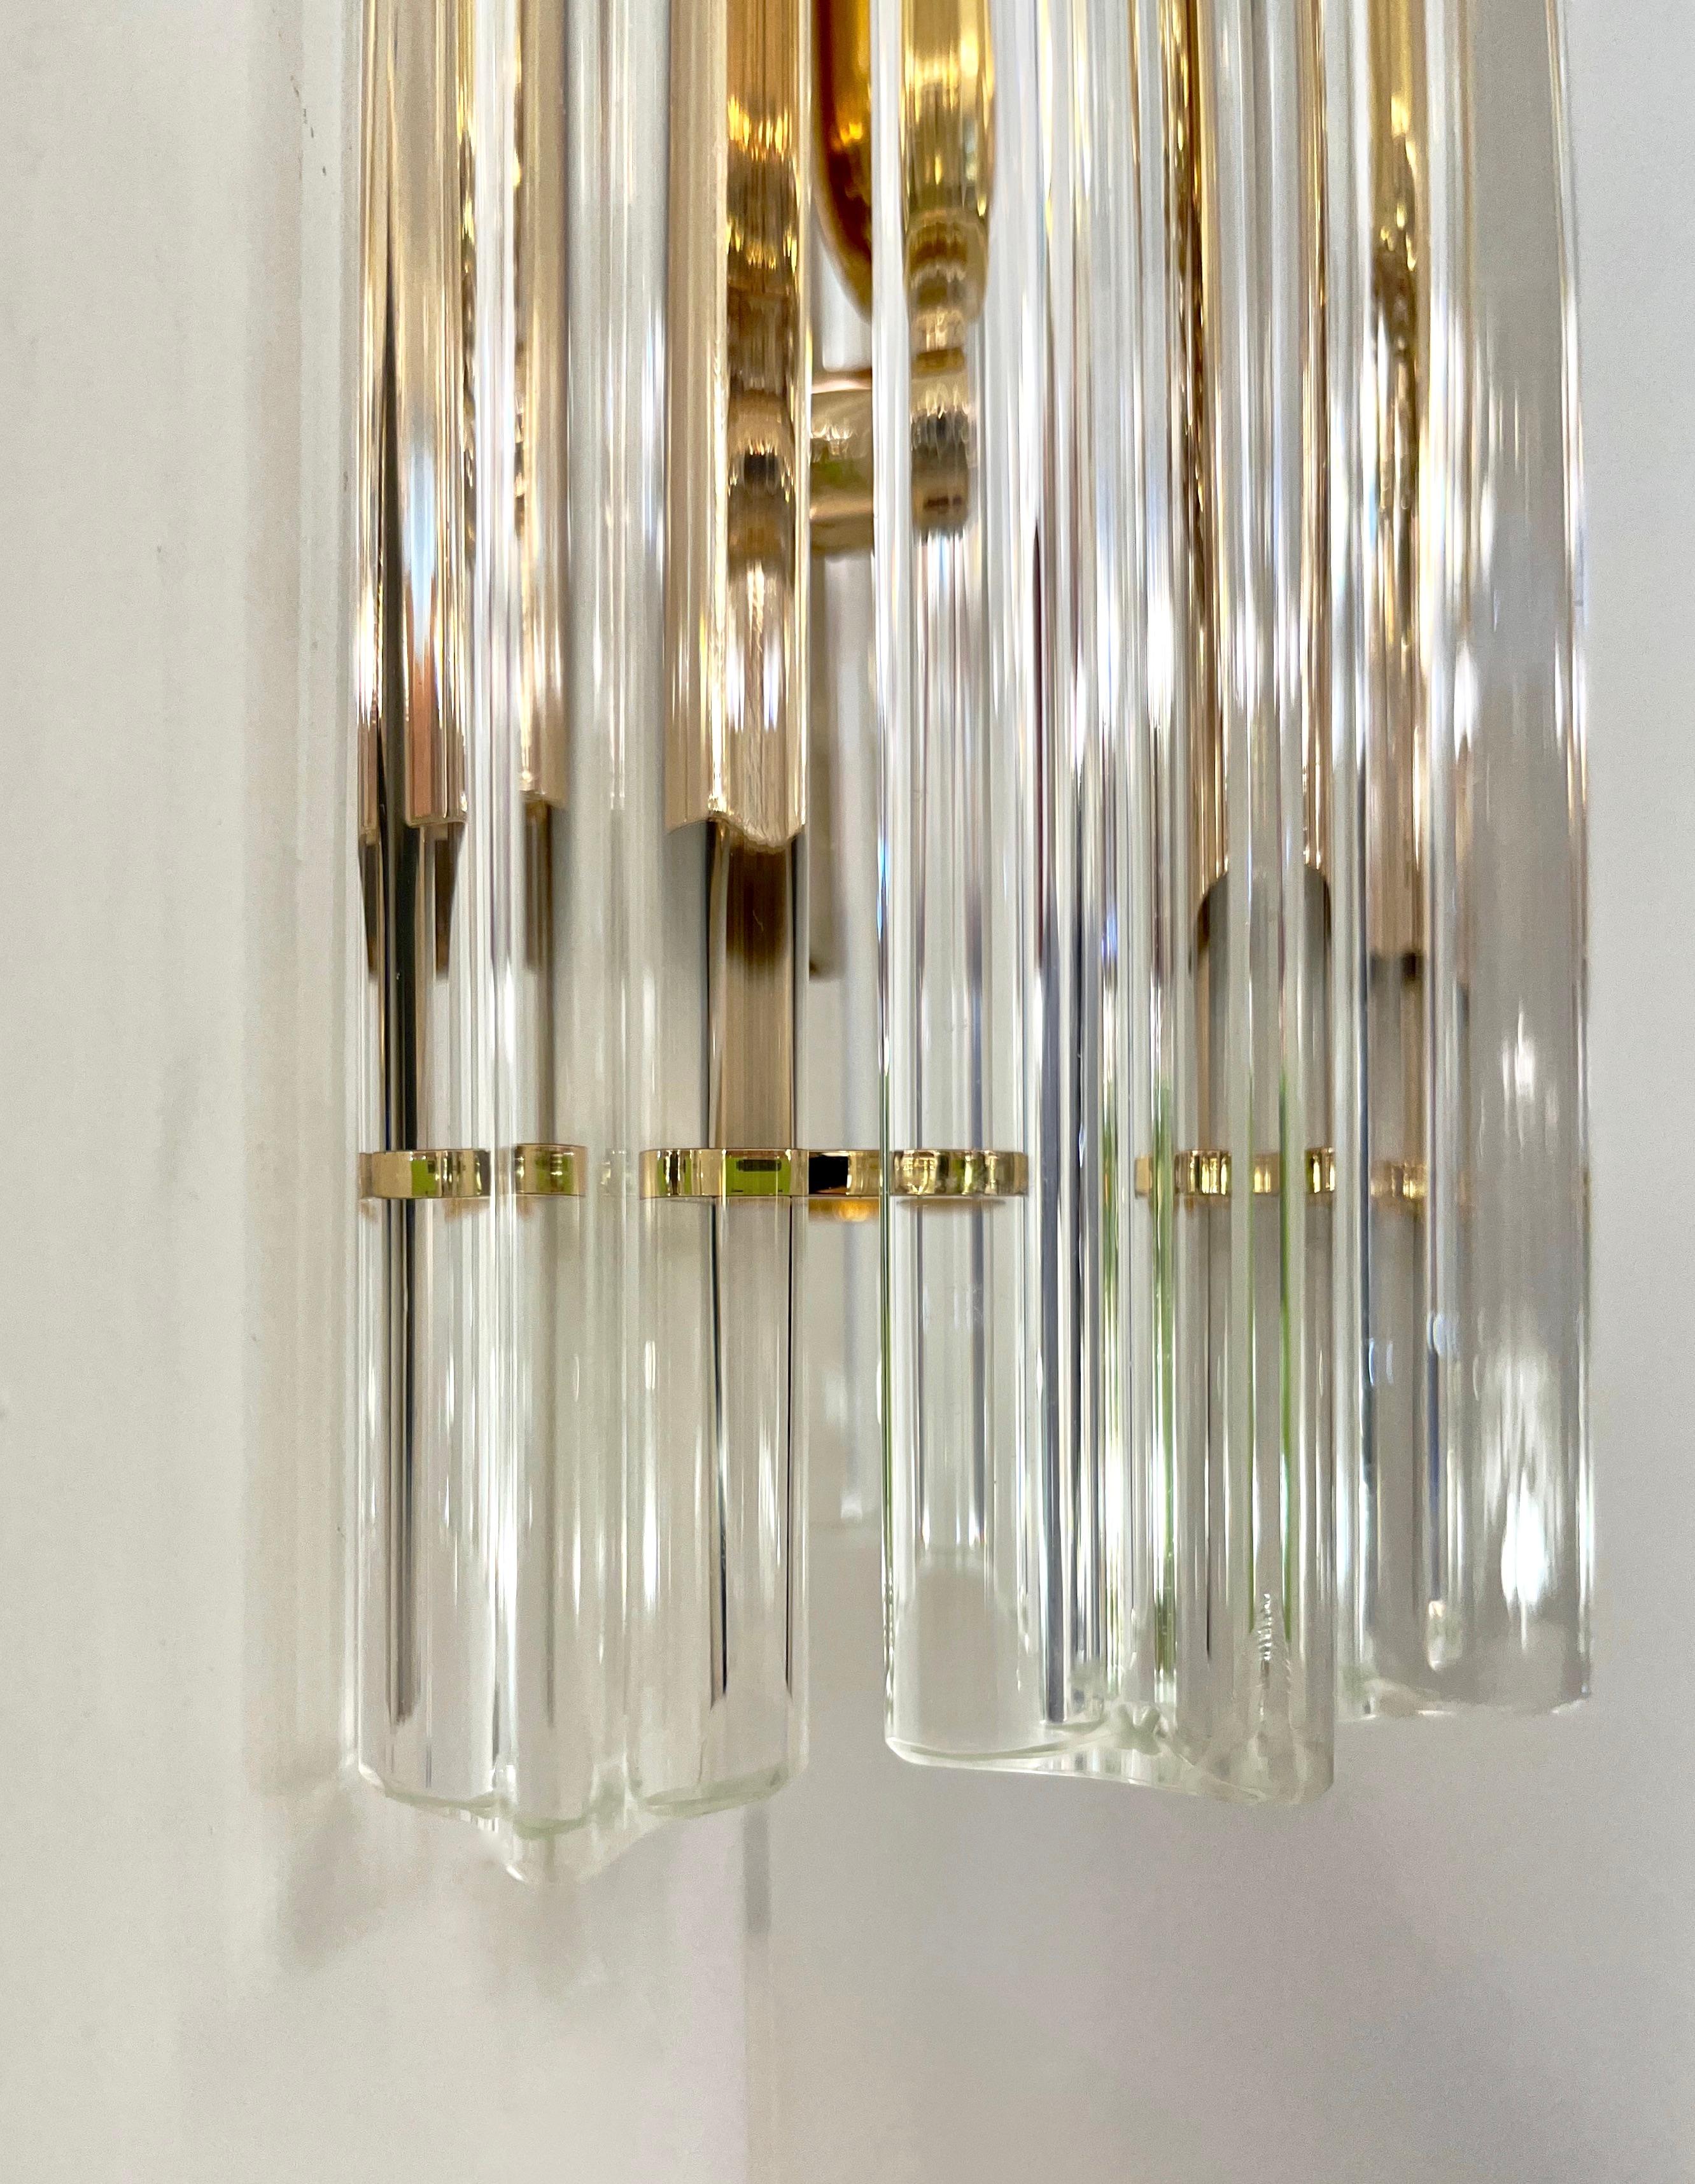 Italian Contemporary Pair of Minimalist Brass Crystal Clear Murano Glass Sconces For Sale 2